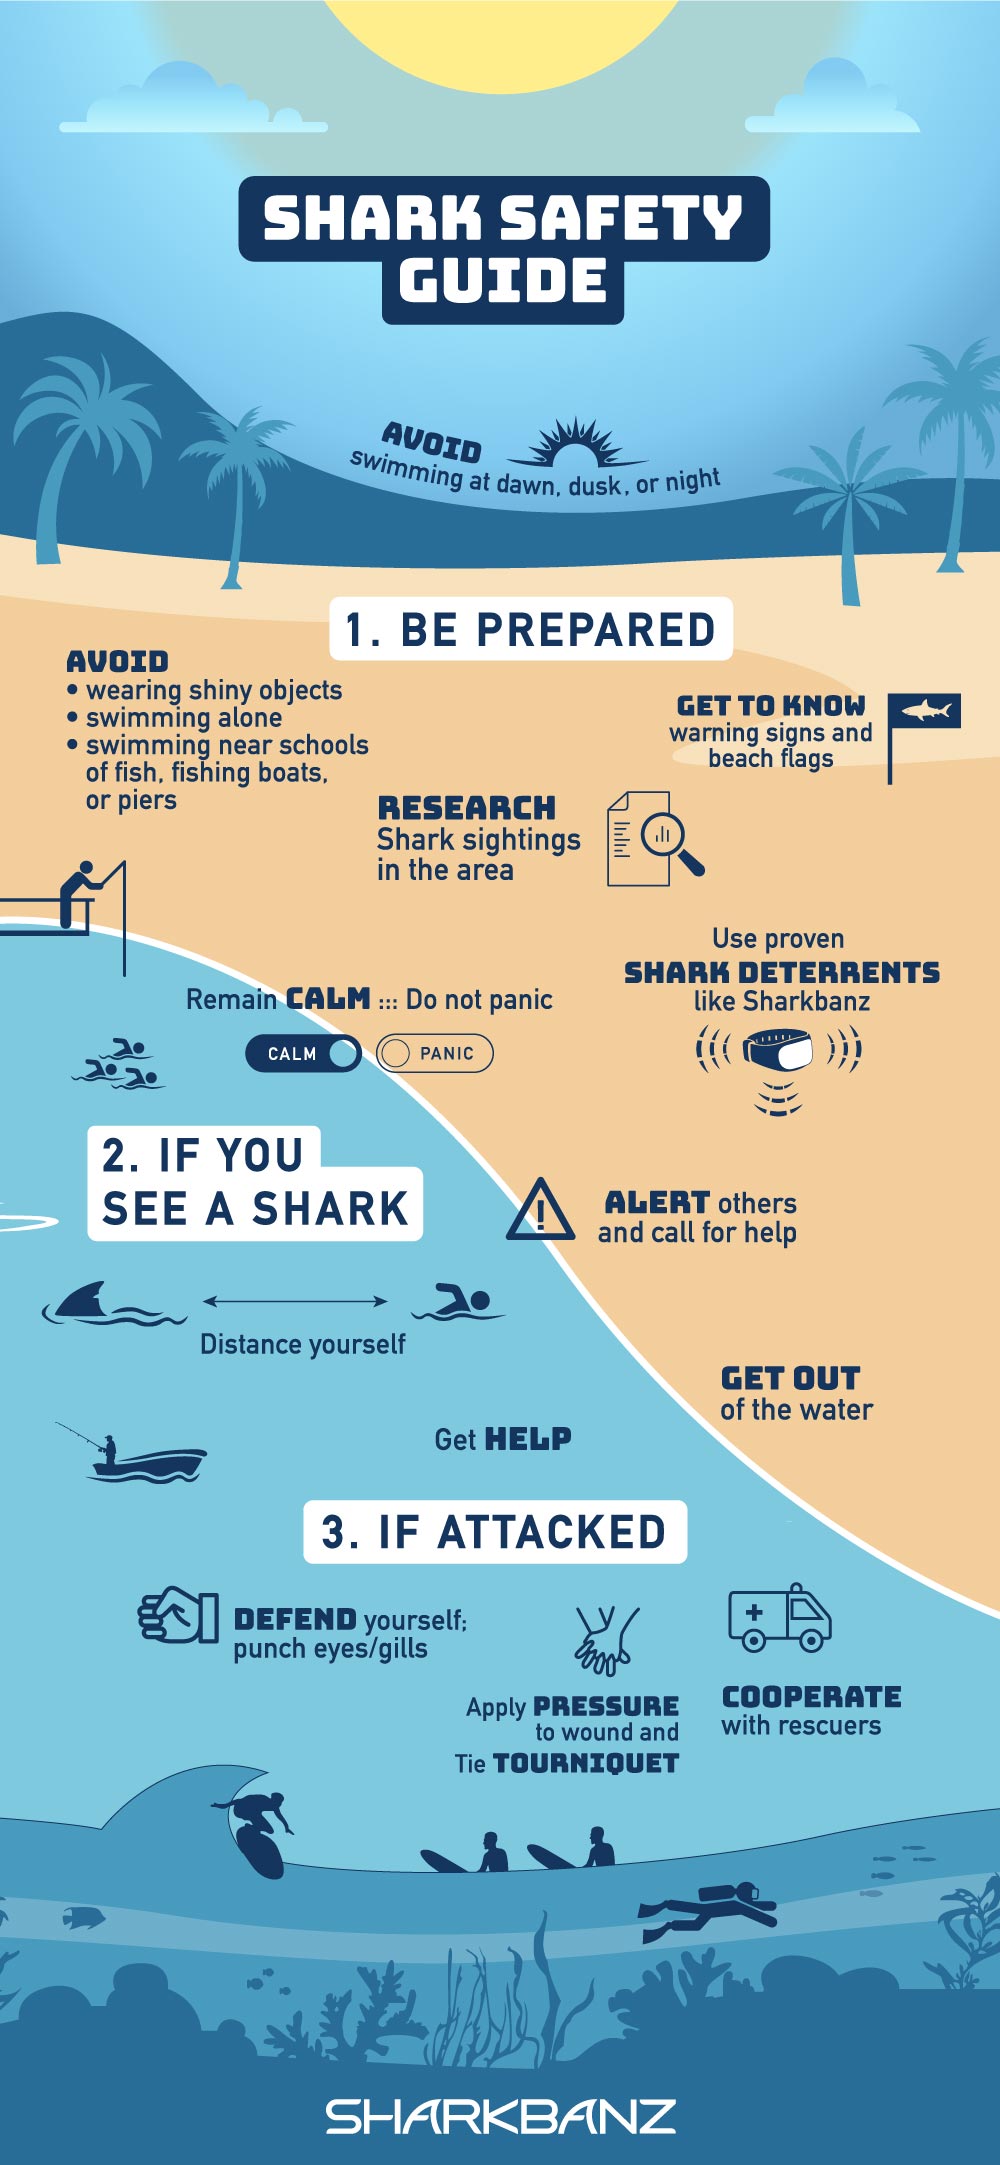 How to Avoid a Shark Attack - Shark Safety Guide